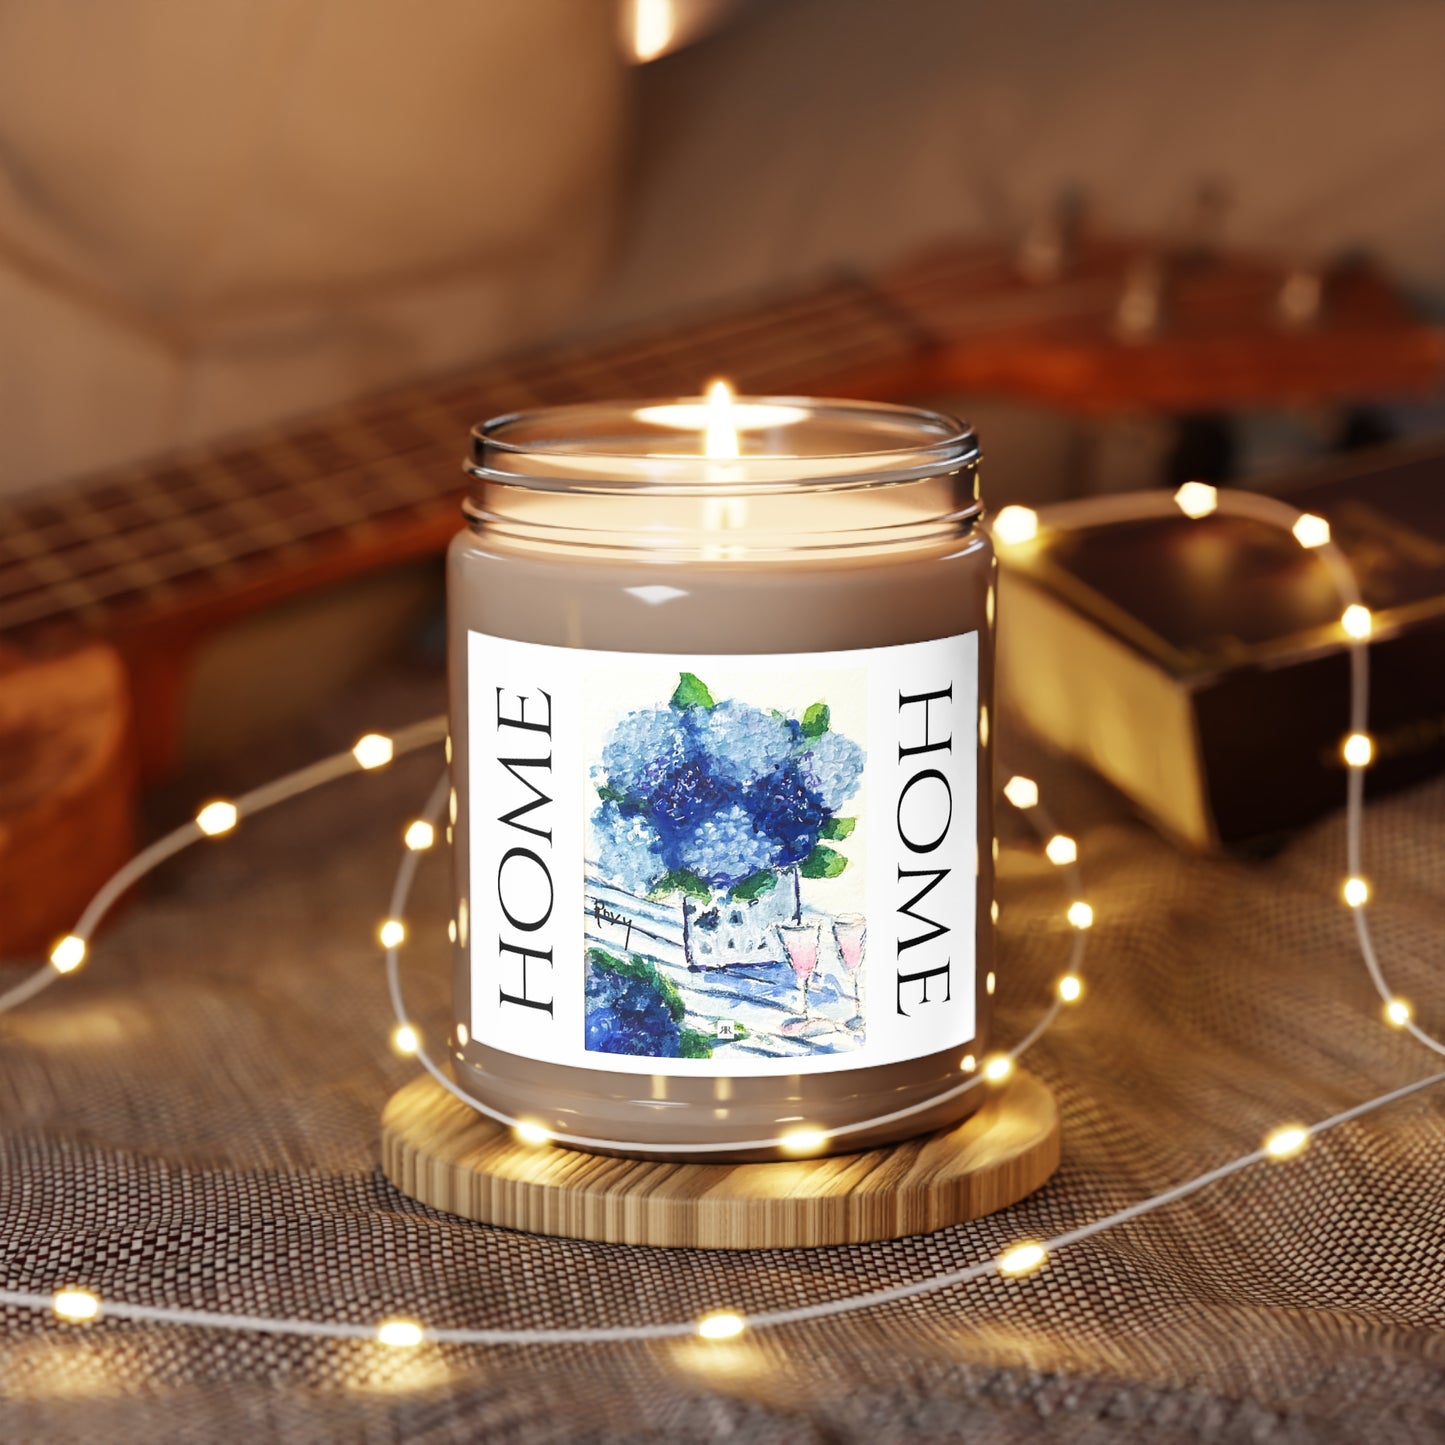 Blue Hydrangeas "Home" Scented Candle 9oz